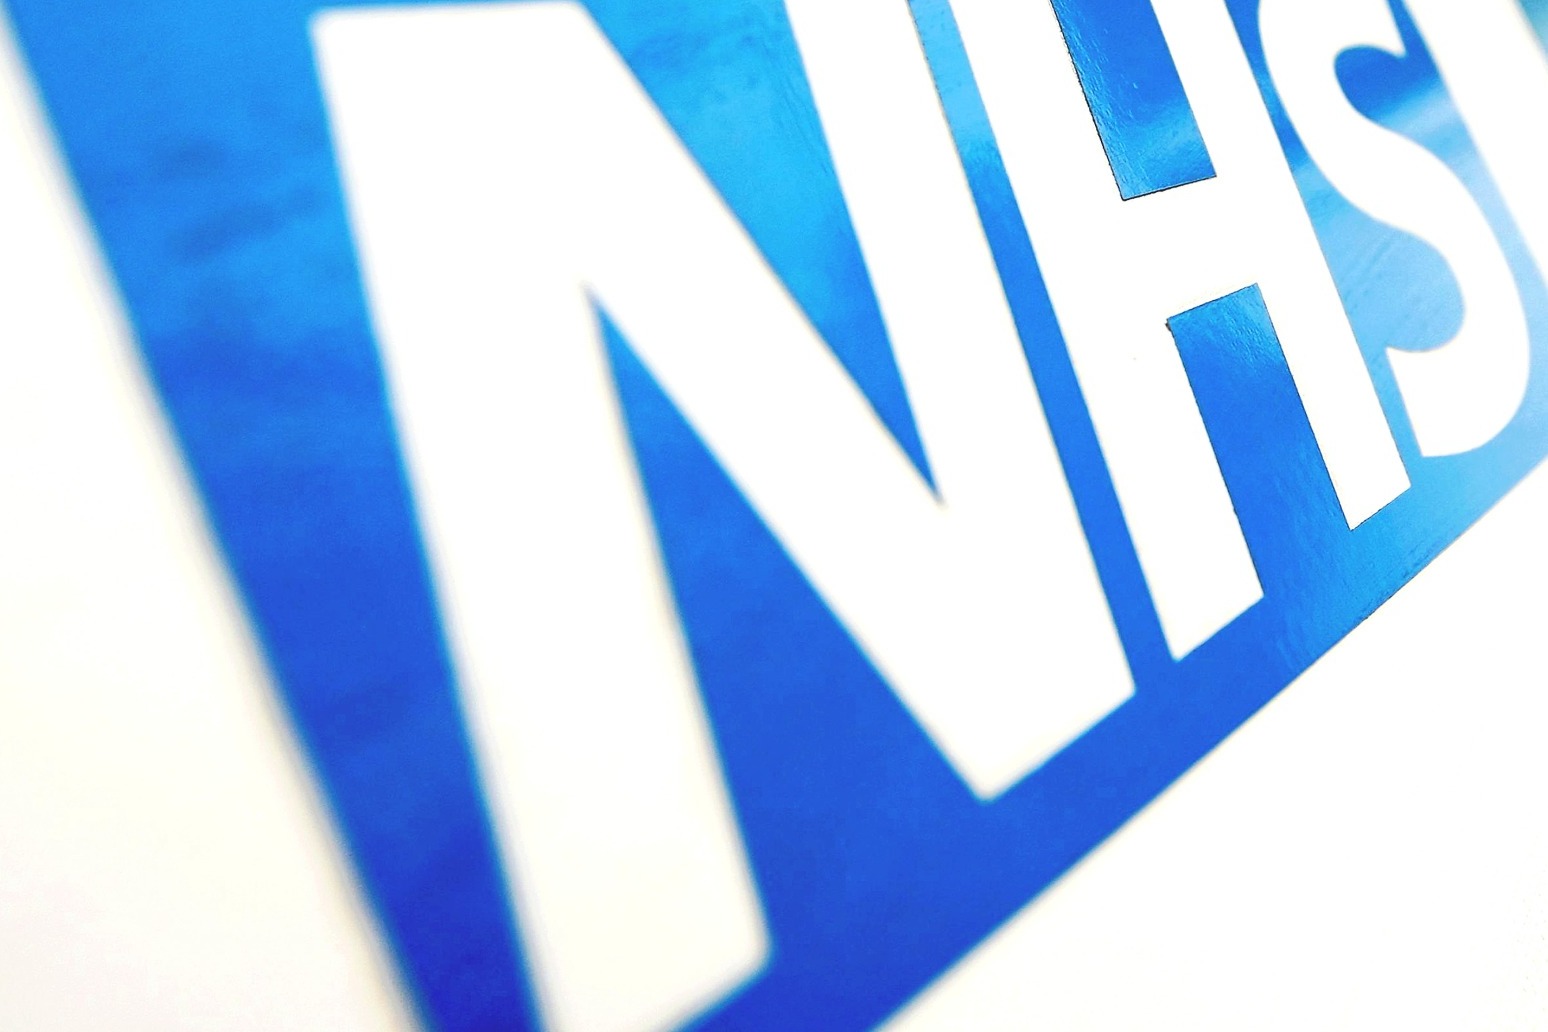 New NHS payment scheme aims to encourage pharma to tackle superbugs